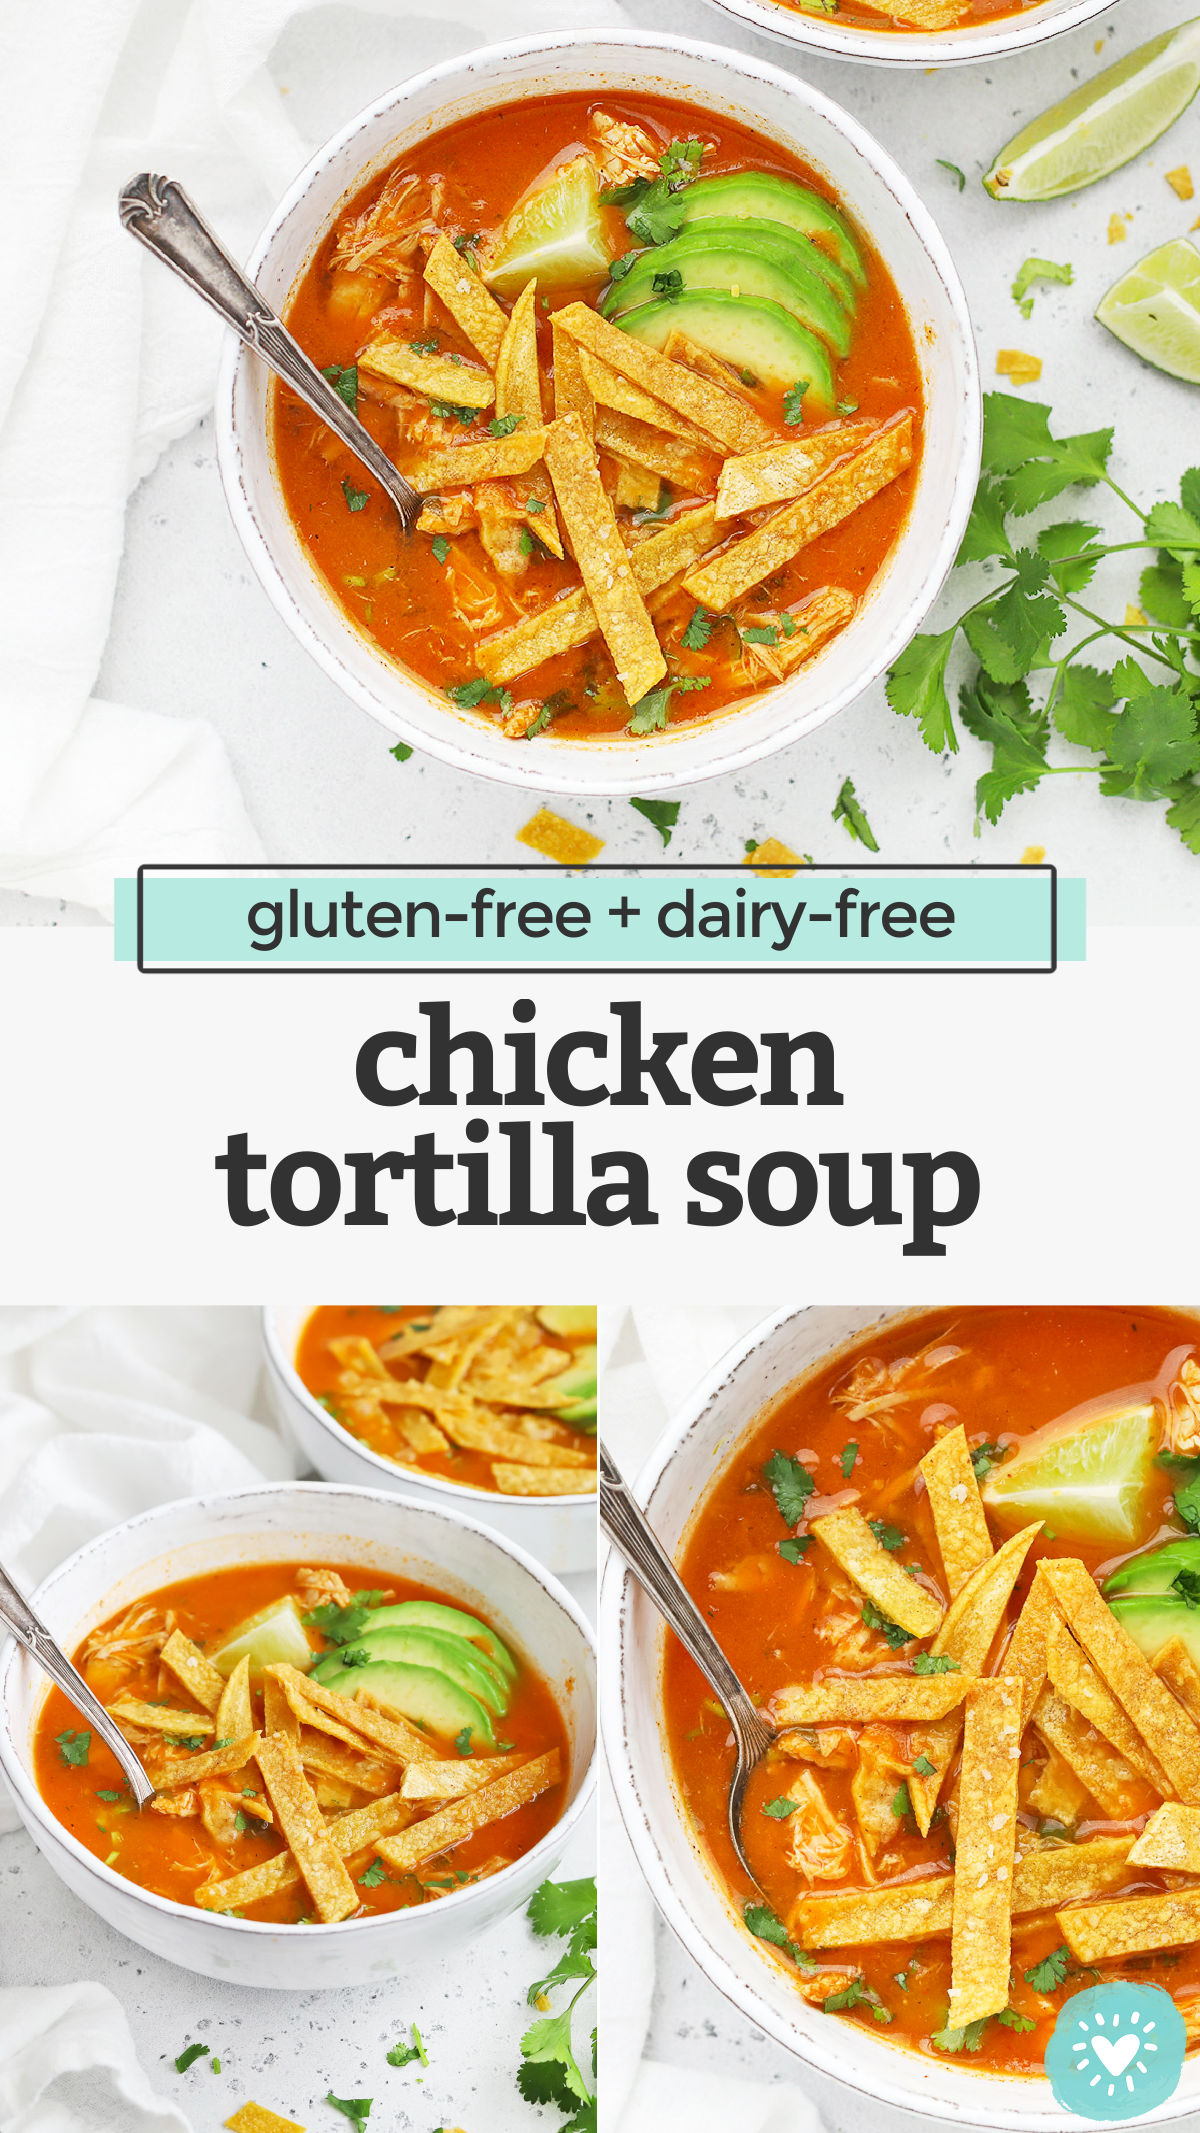 Chicken Tortilla Soup - Tender chicken in a savory, flavorful broth, topped with crispy baked tortilla strips and allll the goodies! (Gluten-Free + Paleo-Friendly) // Chicken Tortilla Soup Recipe // Tortilla Soup // Healthy Soup // #tortillasoup #chickensoup #glutenfree